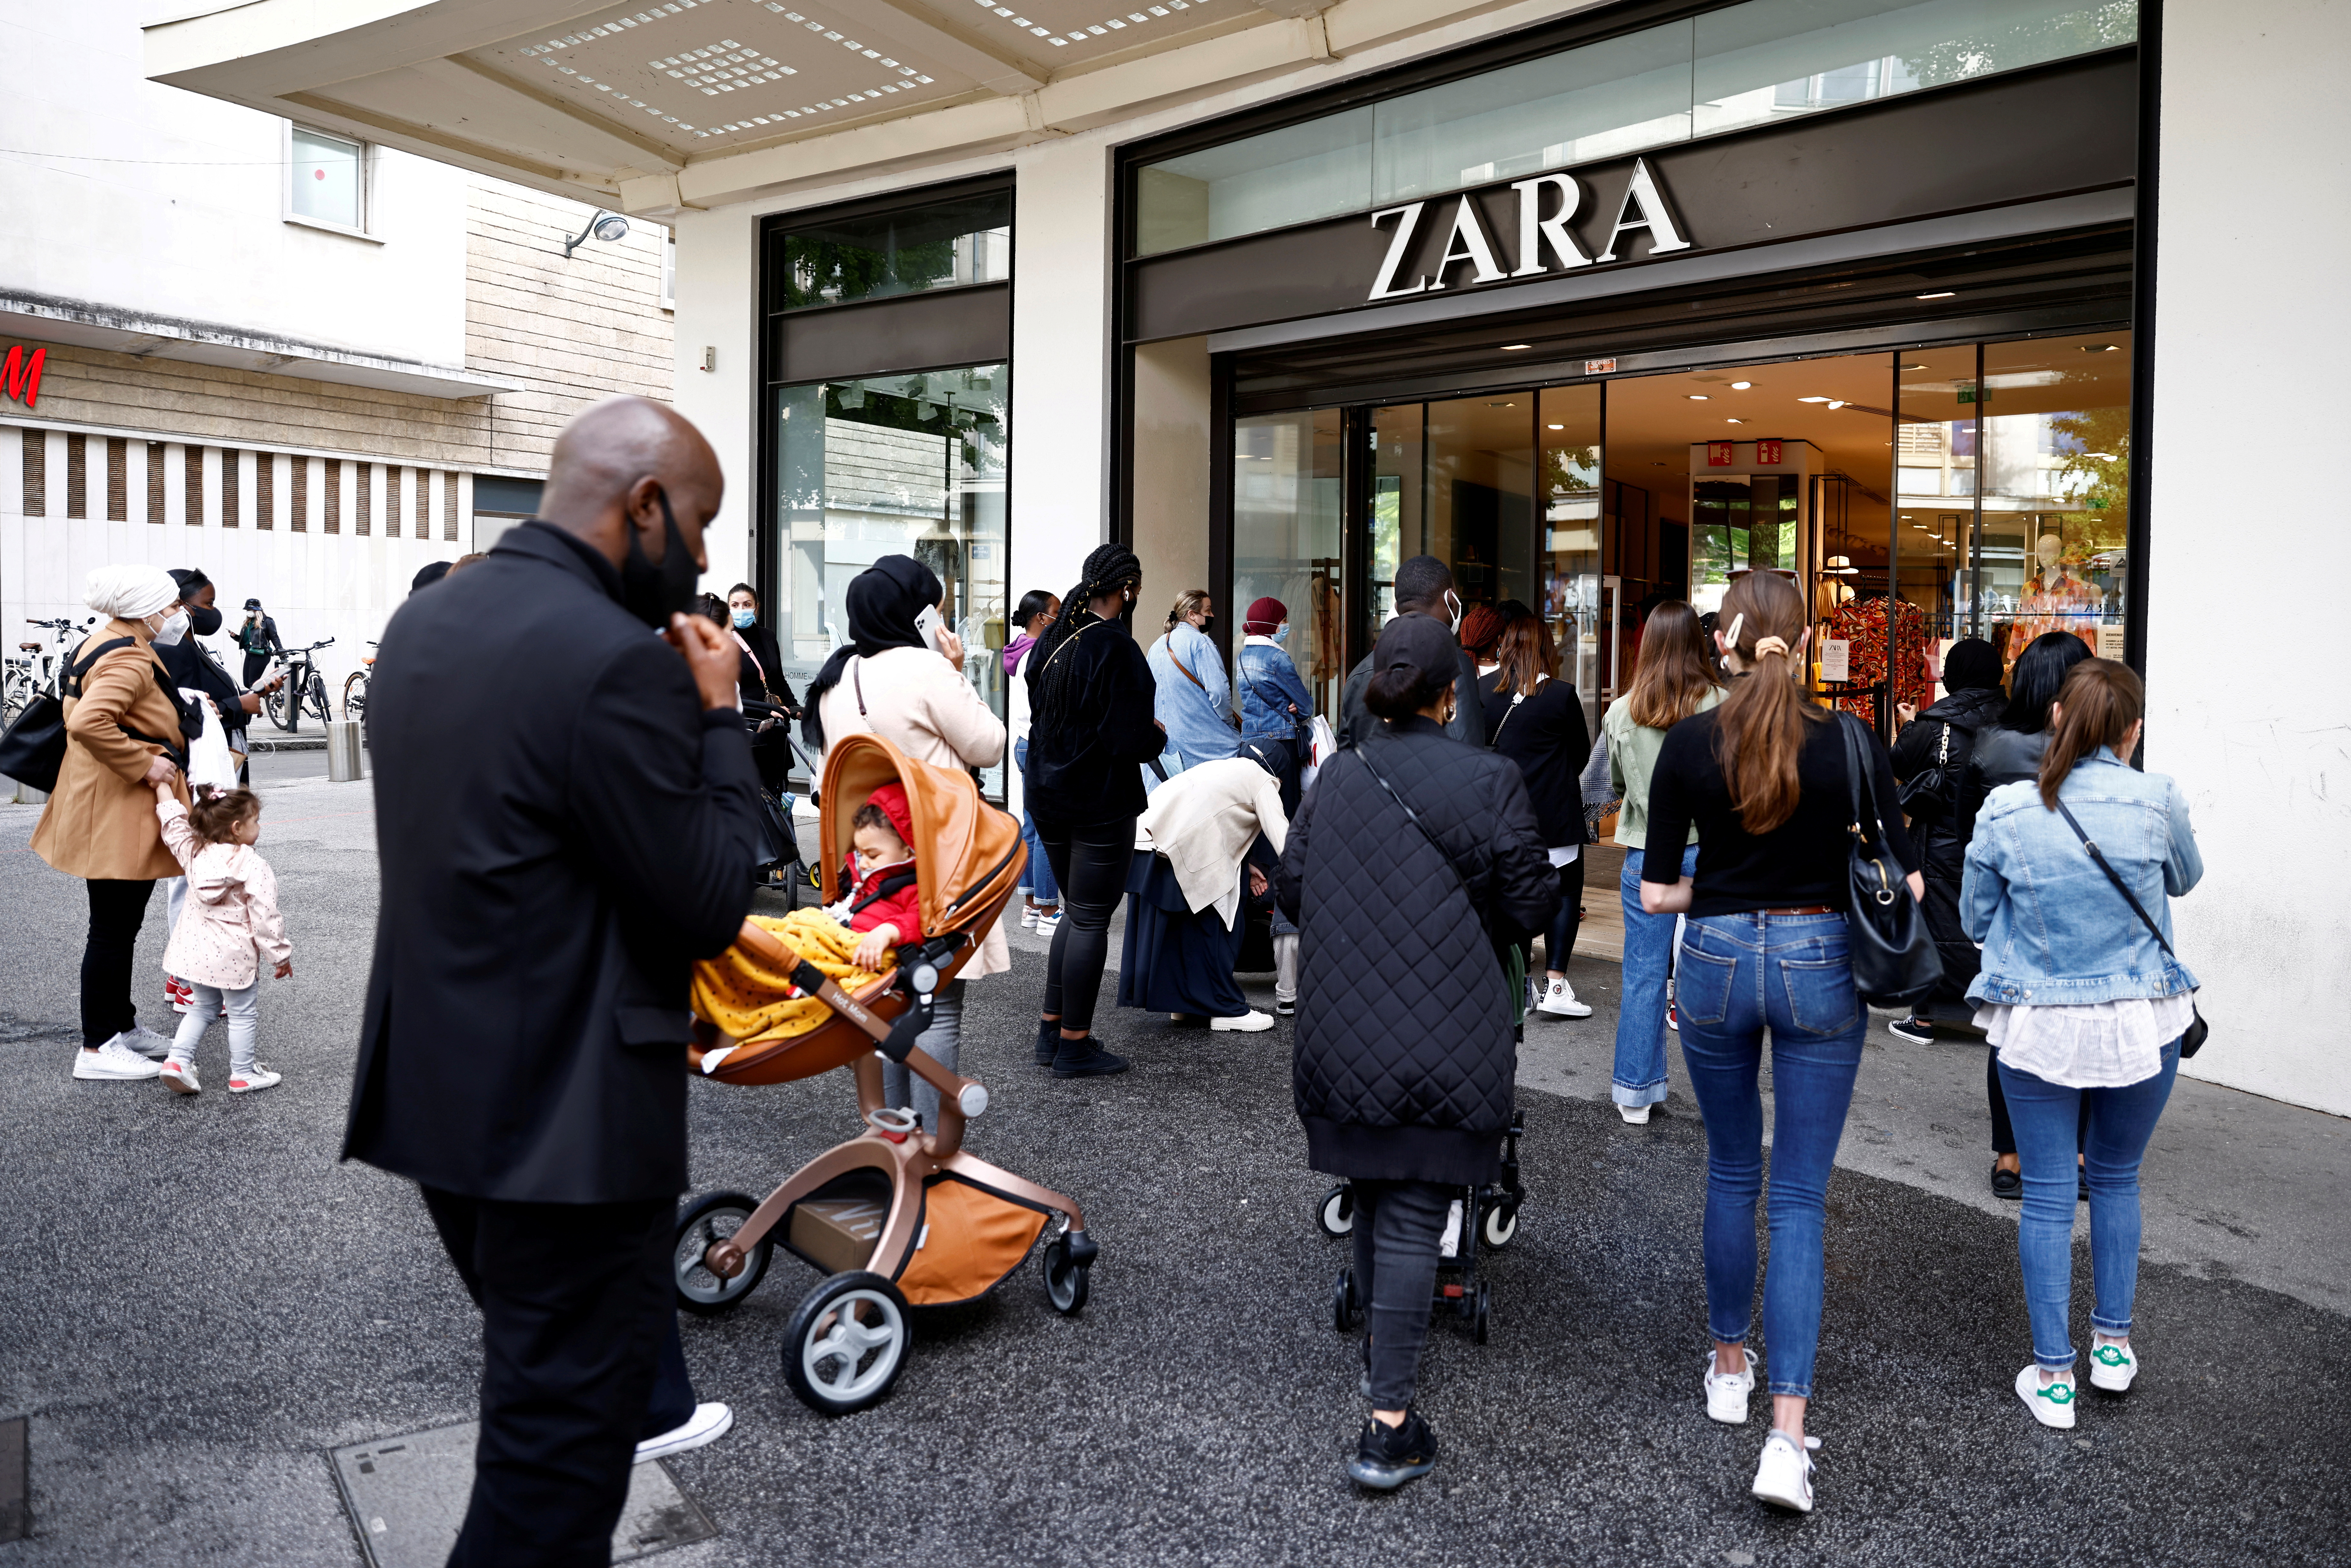 France to Investigate Fashion Retailers for Concealing Crimes Against Humanity, Forced Labor in Xinjiang